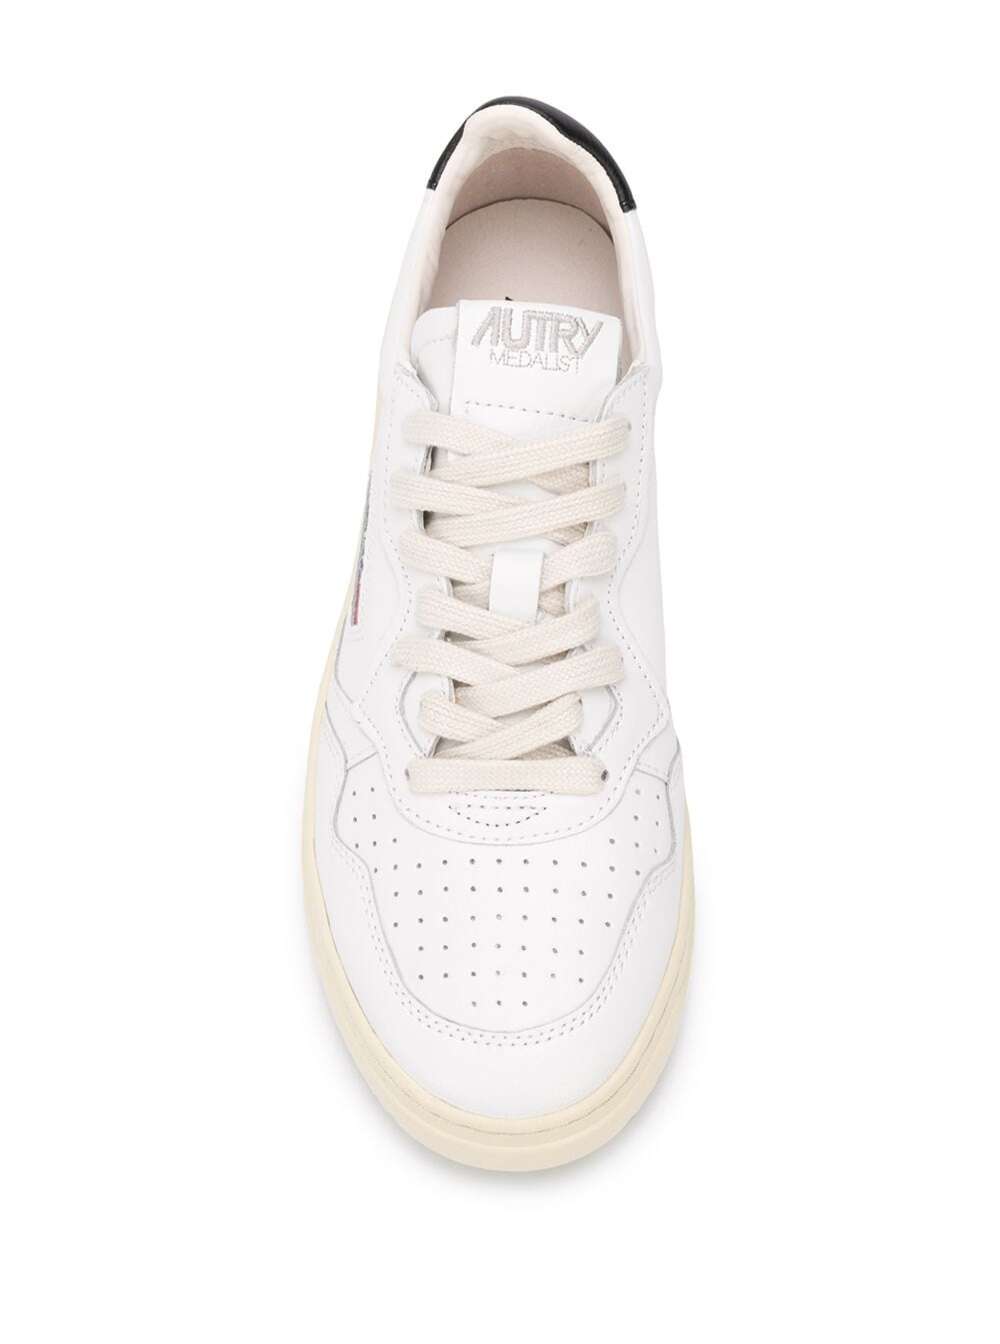 Shop Autry Leather Sneakers With Contrasting Heel Tab In Bianco